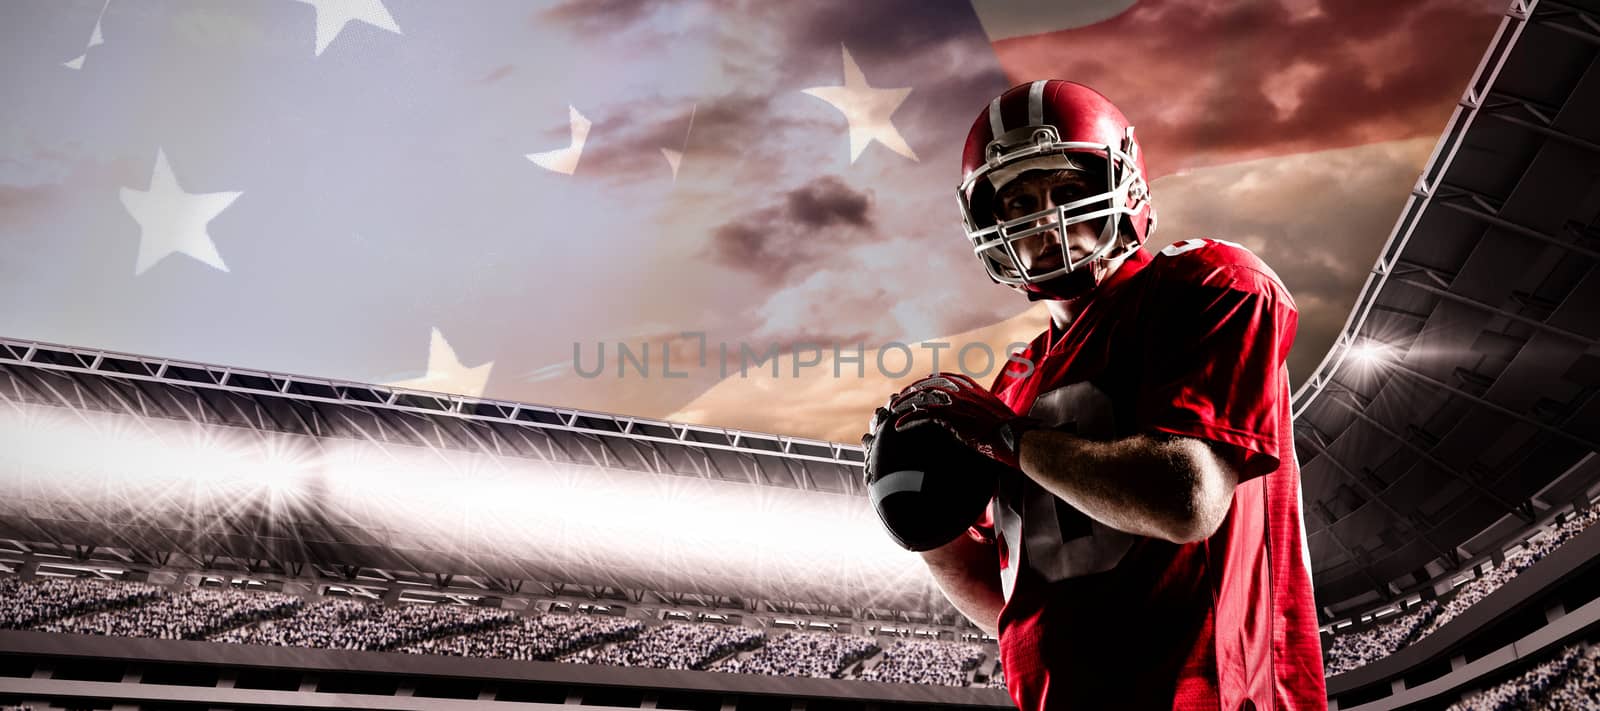 Composite image of american football player standing with helmet preparing to throw ball by Wavebreakmedia